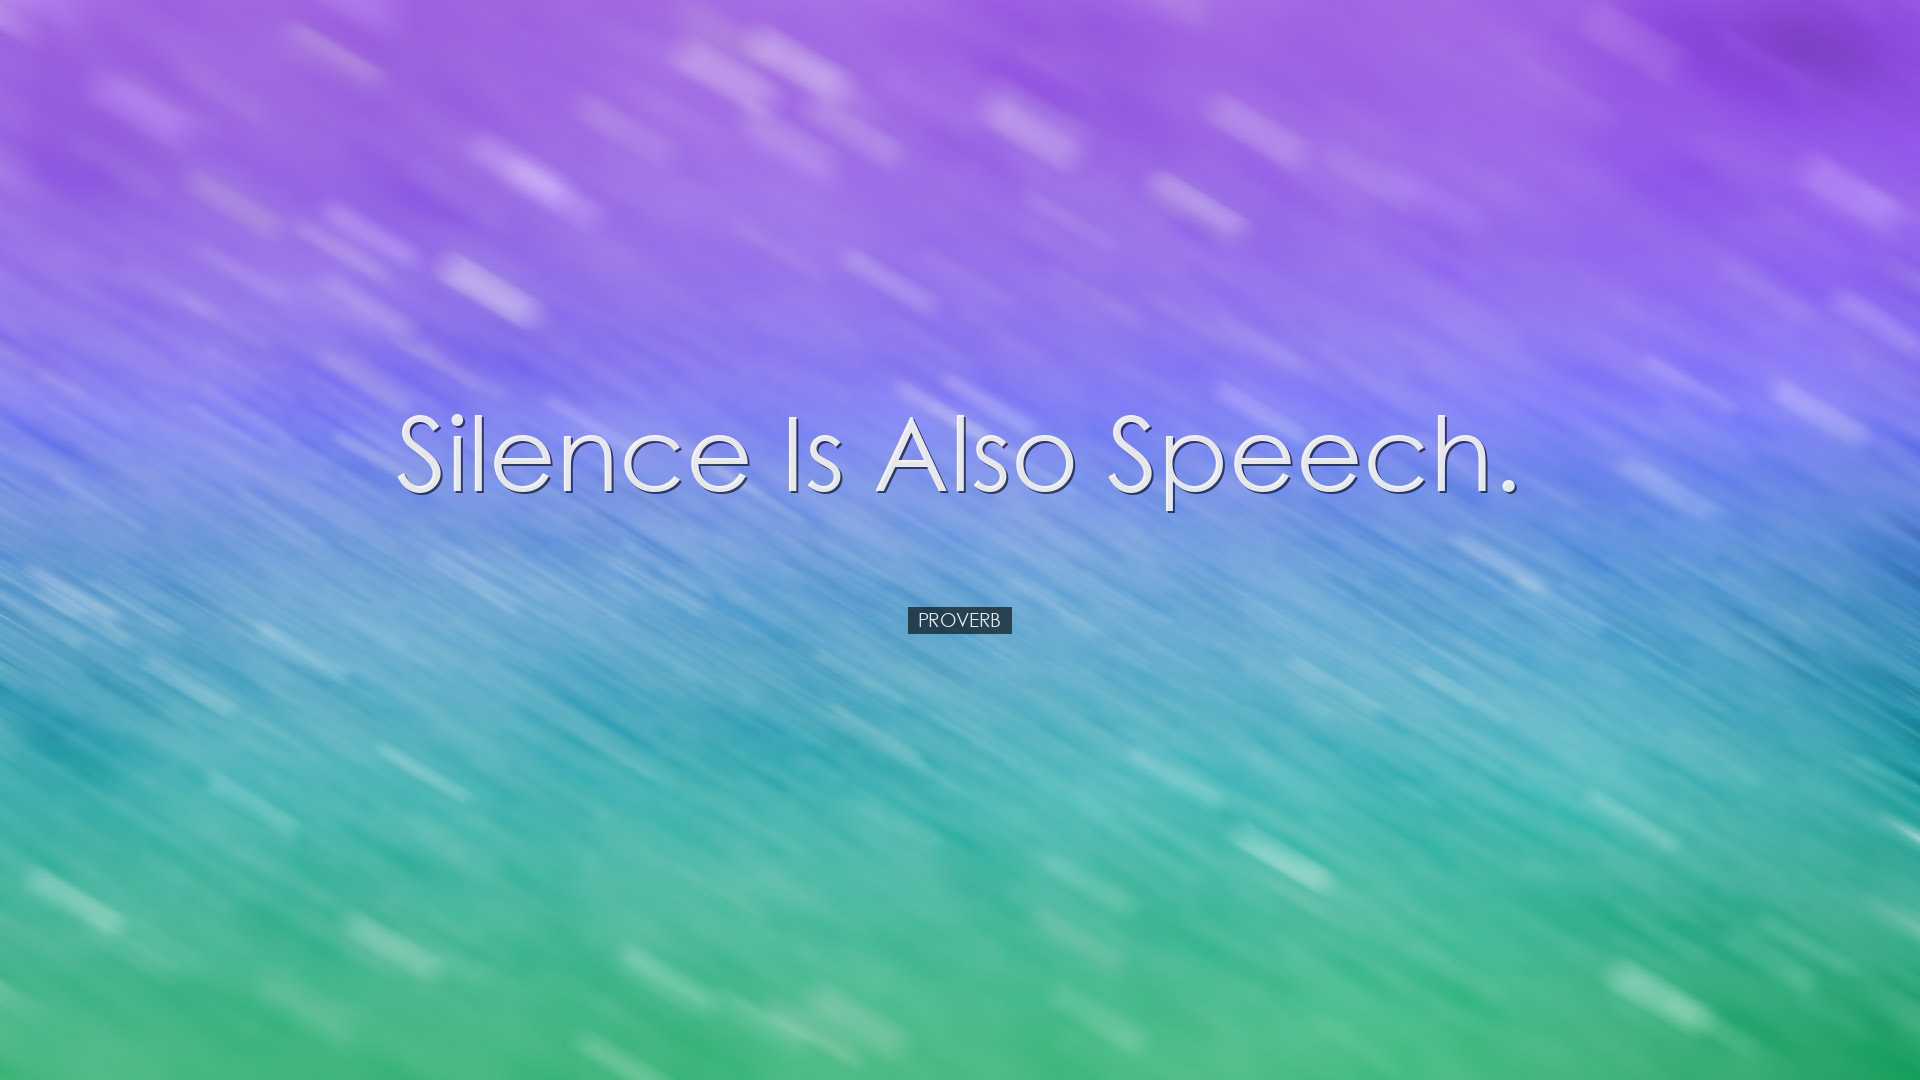 Silence is also speech. - Proverb